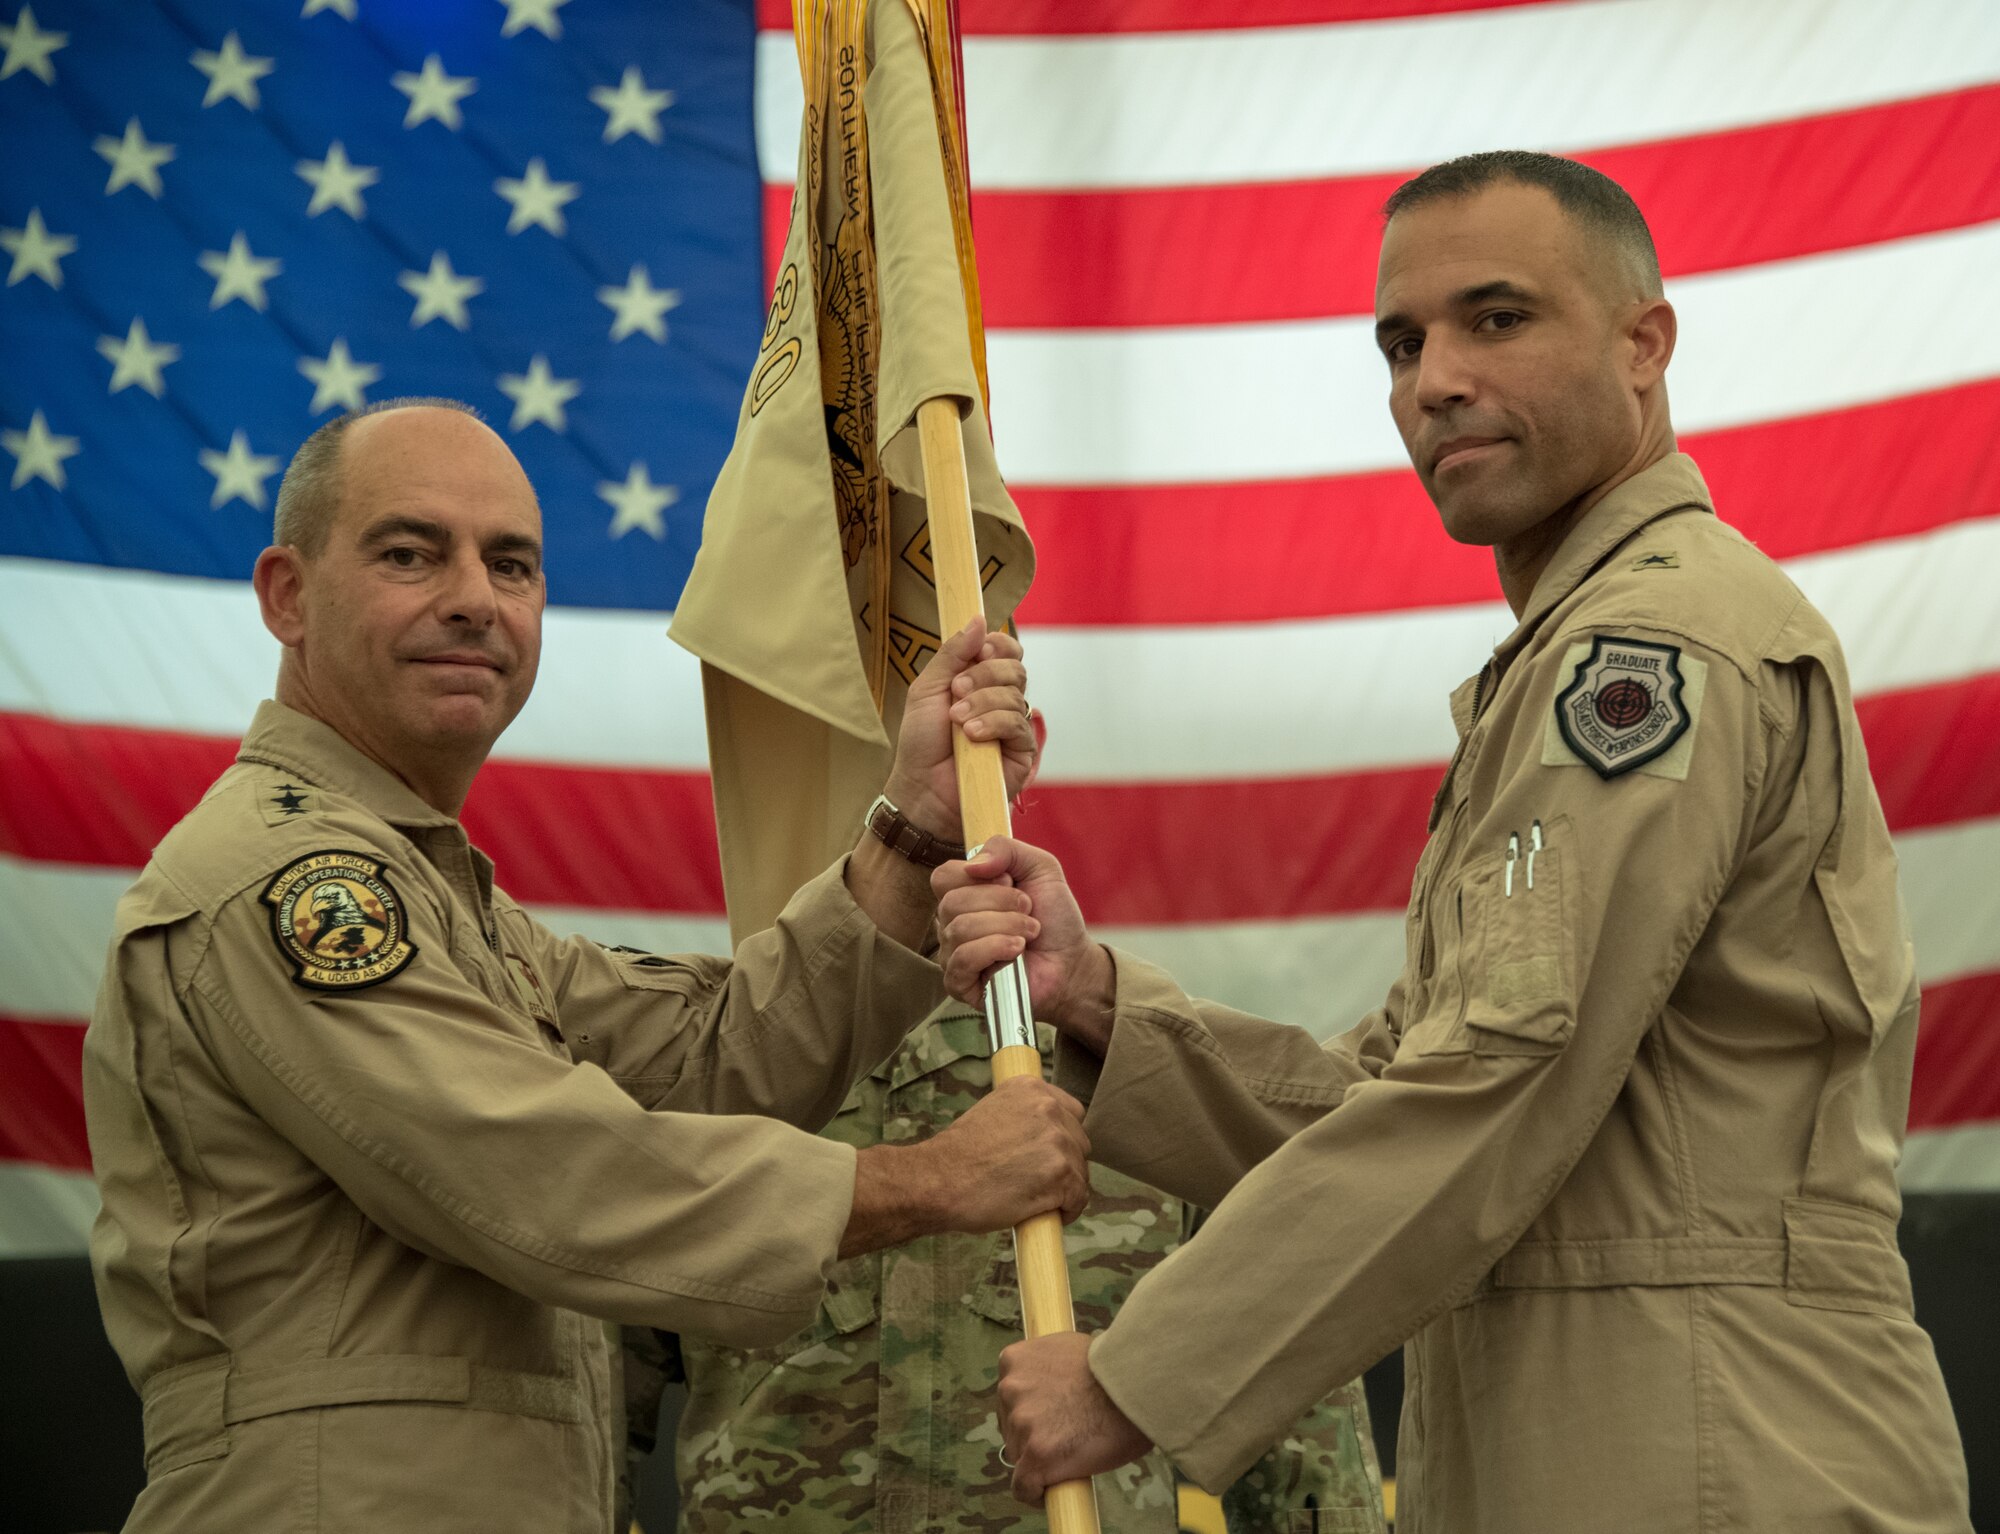 U.S. Air Force Lt. General Jeffrey L. Harrigian, commander of the U.S. Air Force Central Command, hands the 380th Air Expeditionary Wing’s guidon to incoming Commander Brig. Gen. Adrian L. Spain during a change of command ceremony at Al Dhafra Air Base, July 2, 2018. (U.S. Air Force photo by Tech. Sgt. Nieko Carzis)